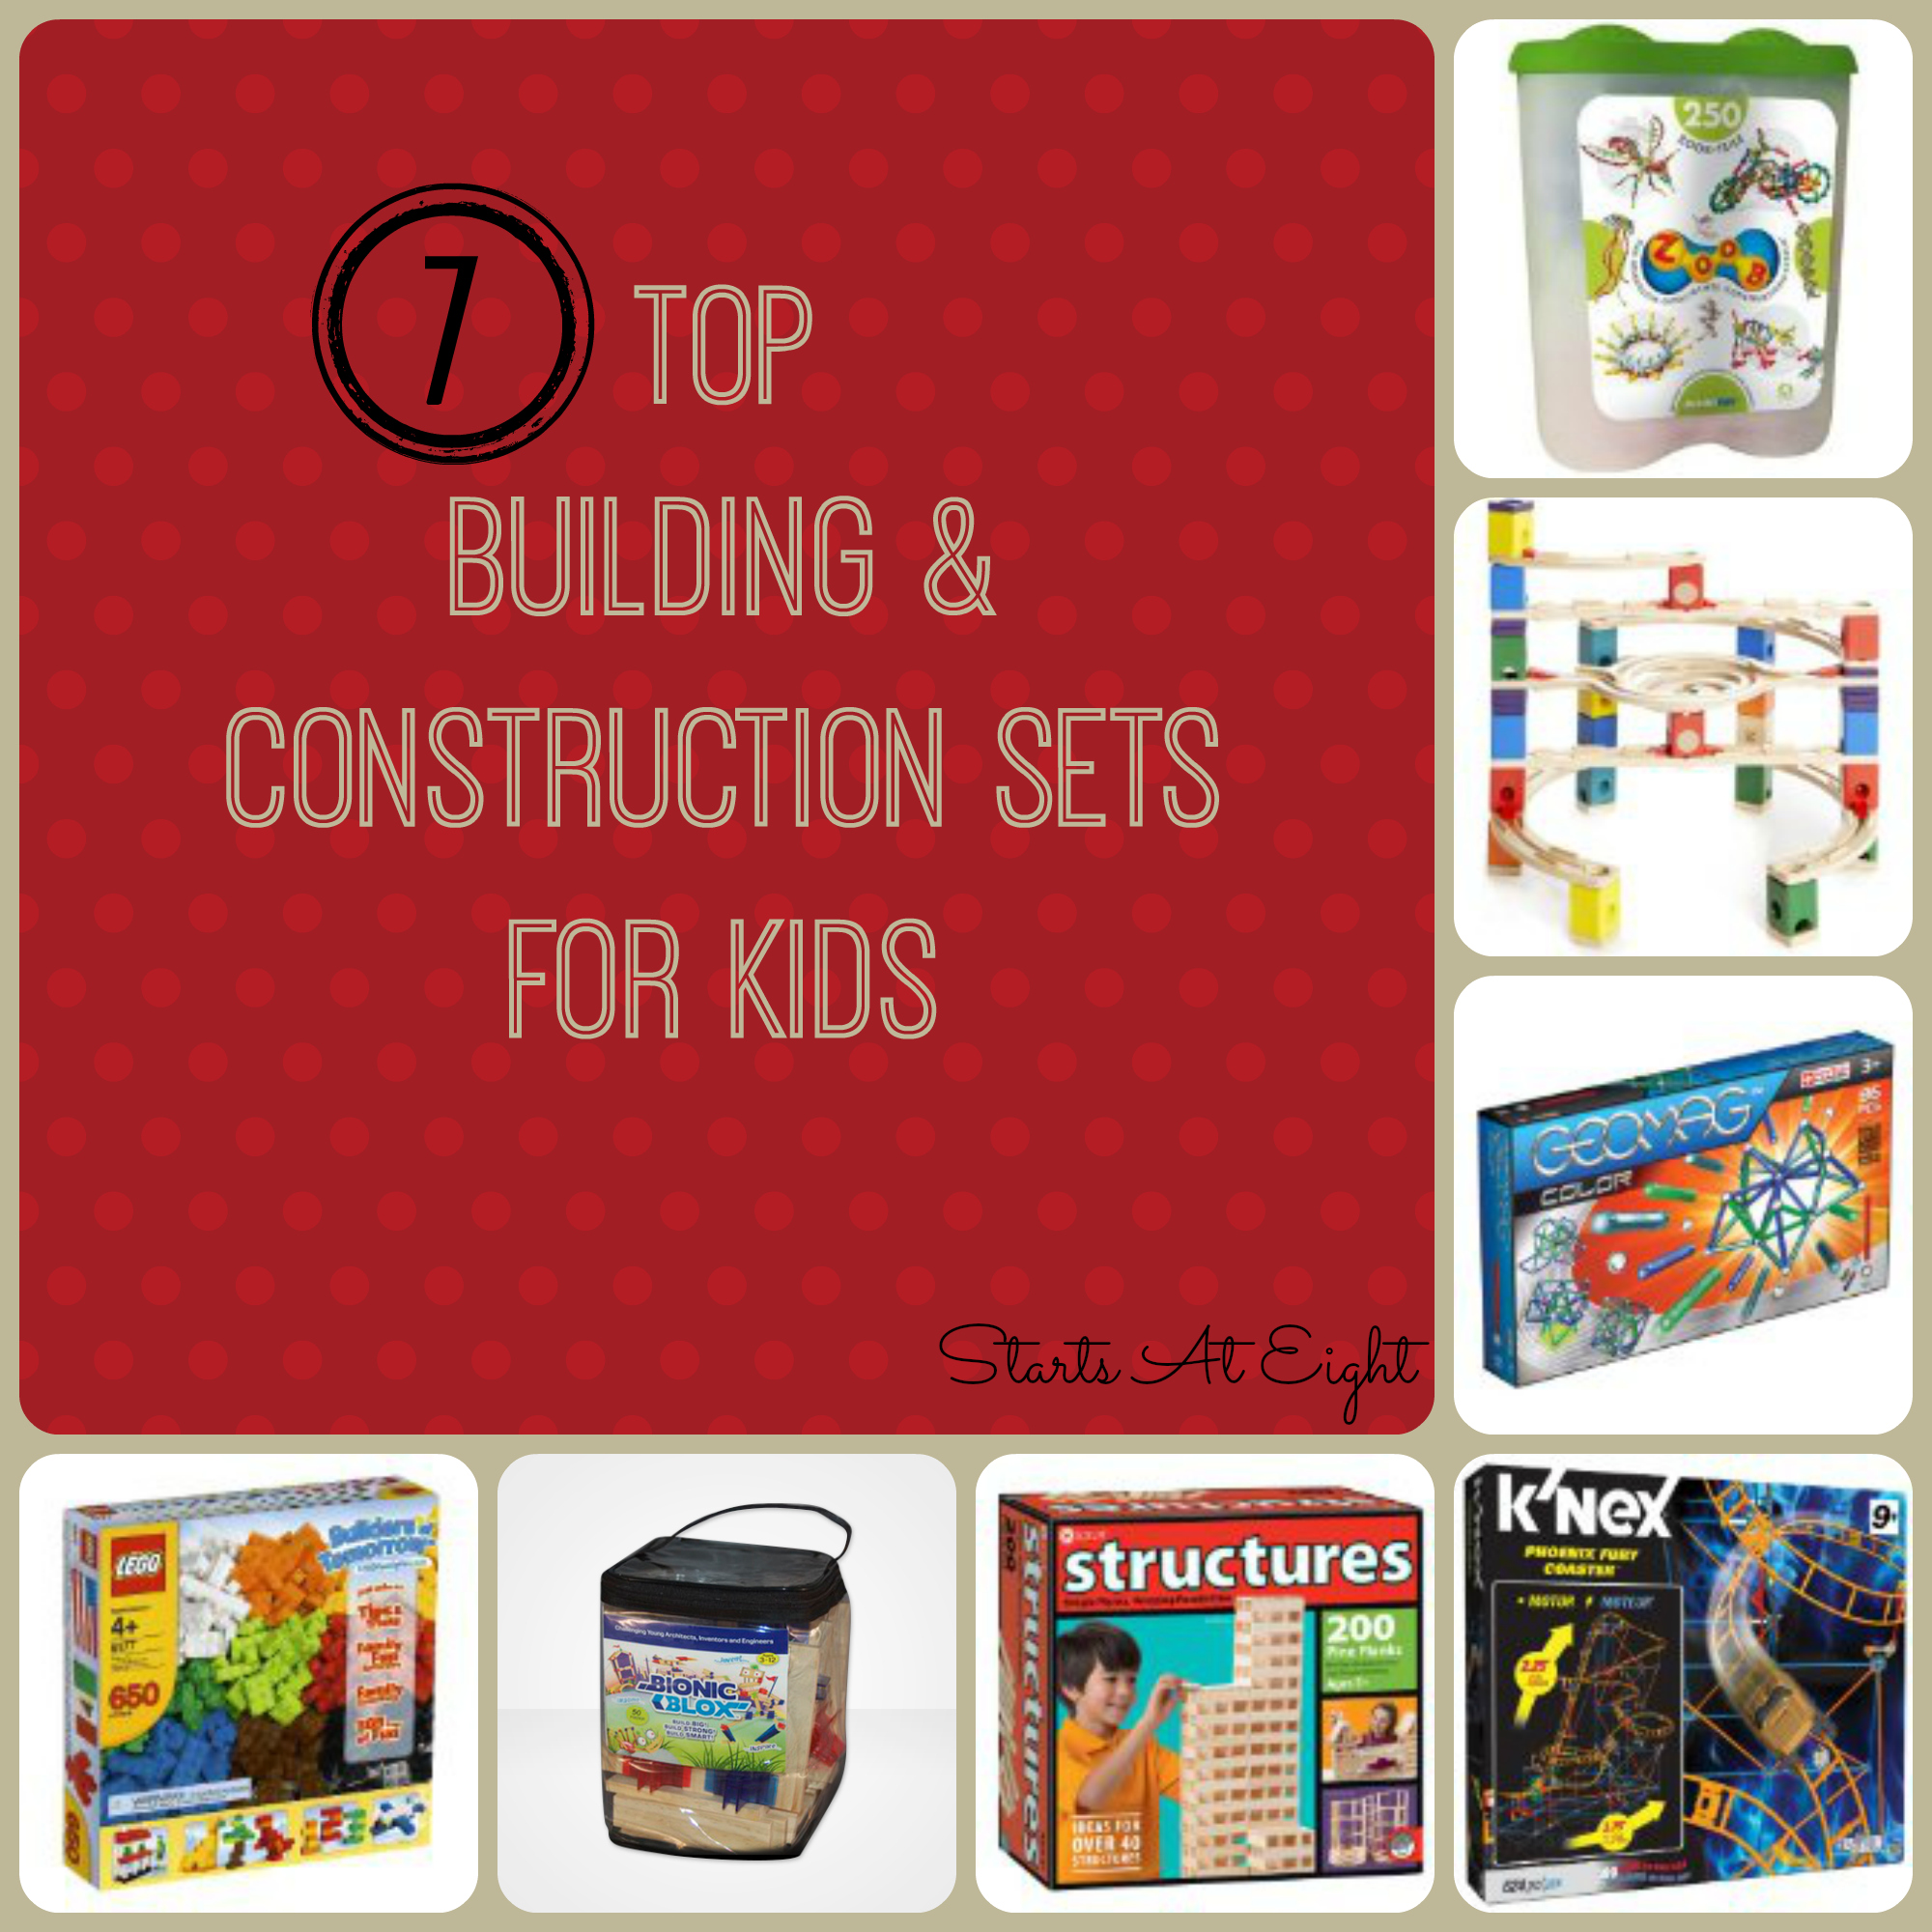 7 Top Building & Construction Sets For Kids from Starts At Eight